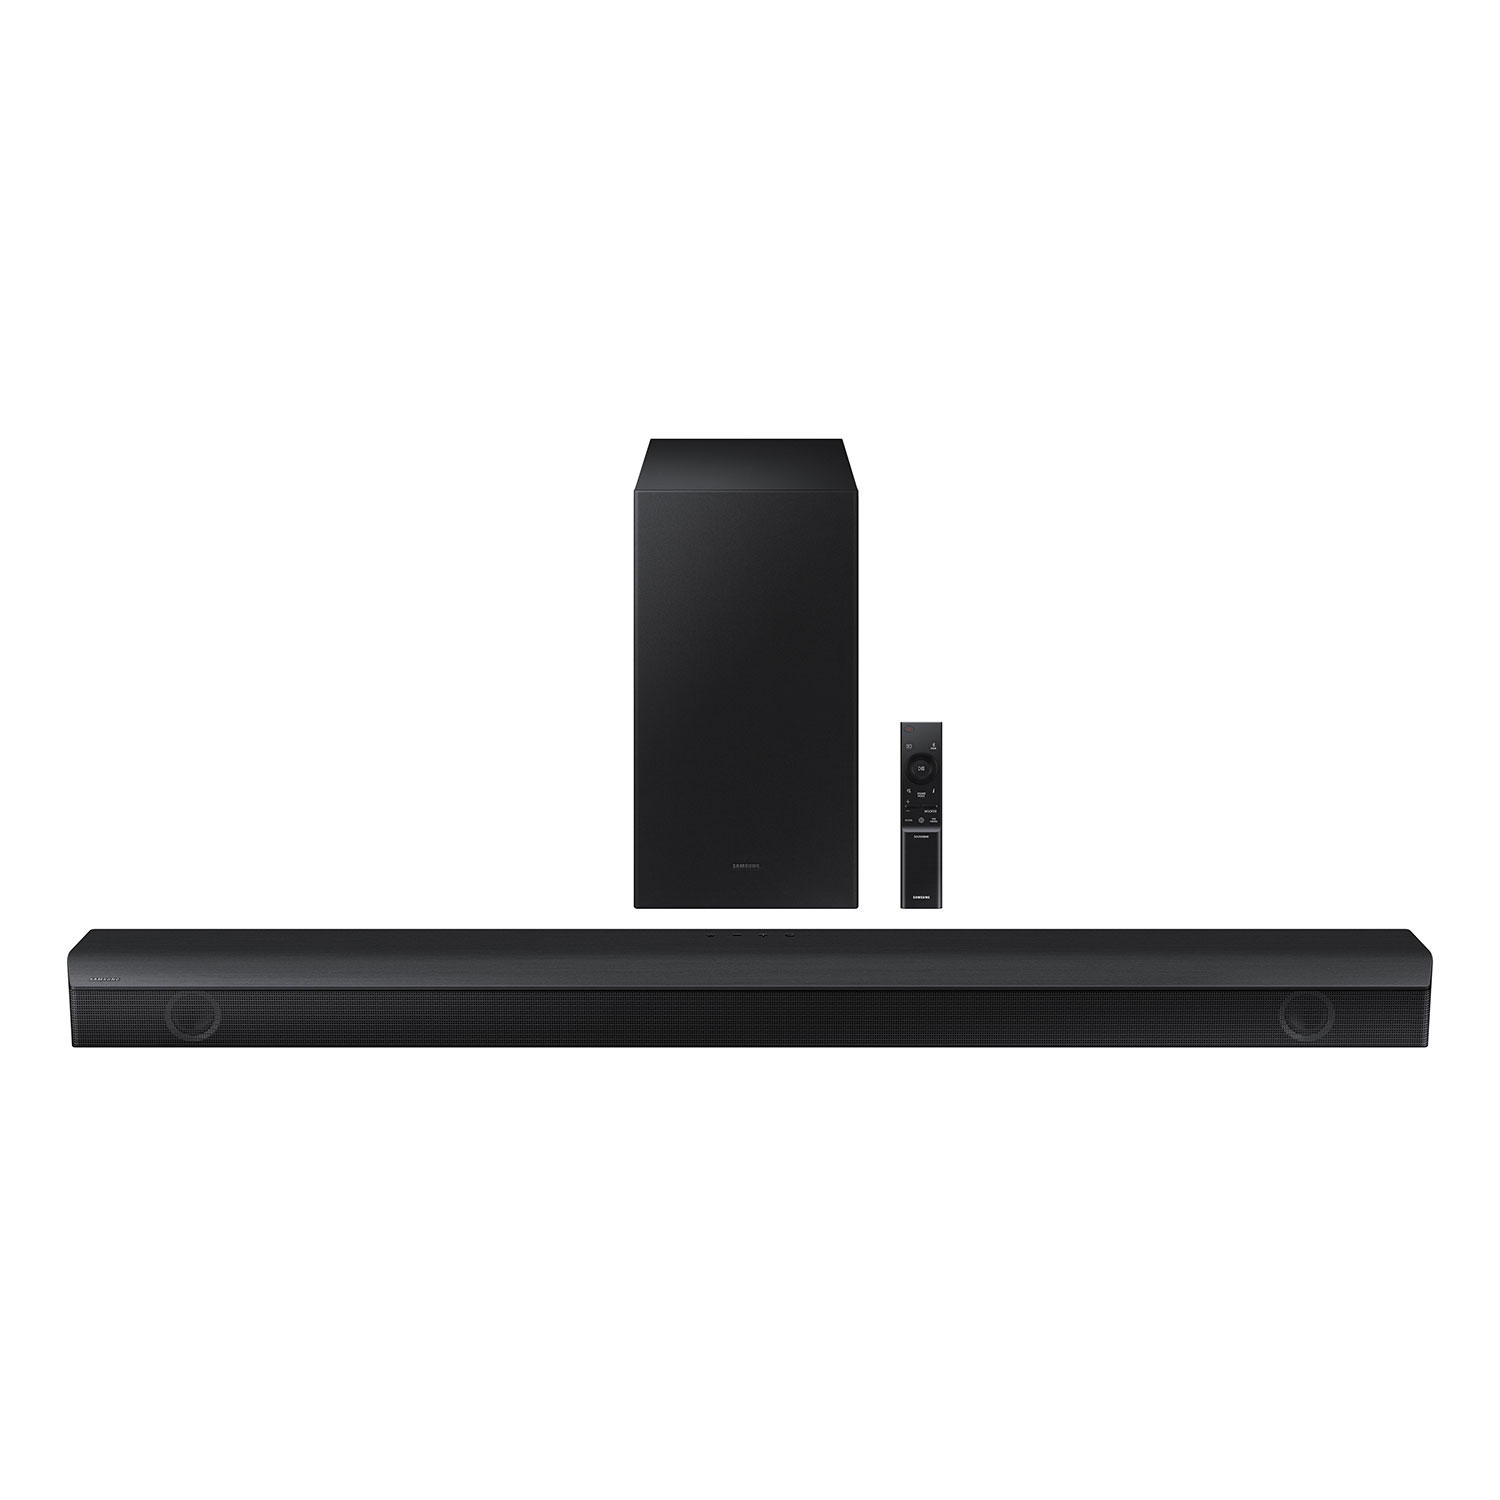 Samsung 3.1 Ch. Sound Bar with Wireless Subwoofer [Factory Reconditioned]